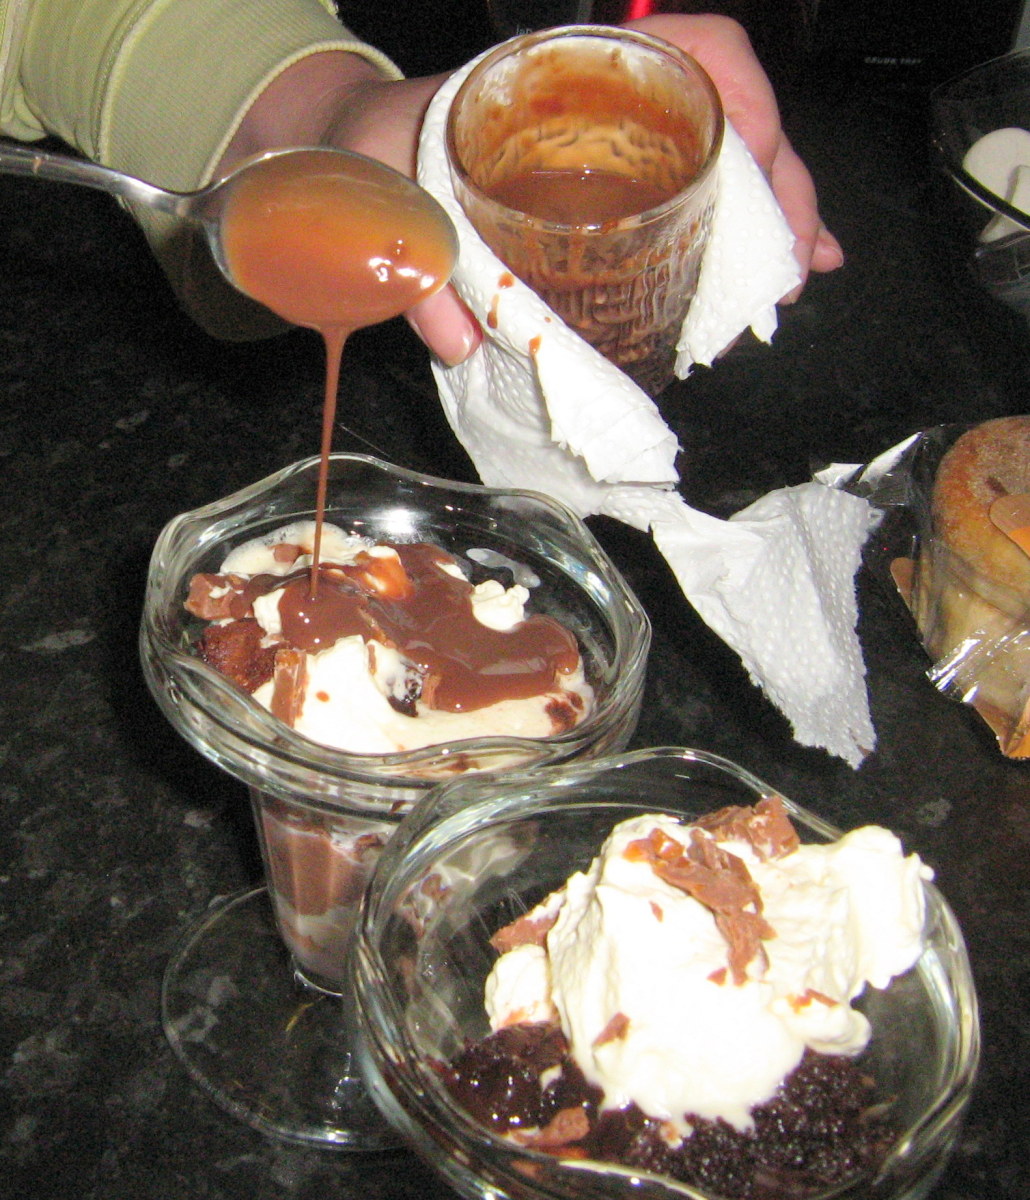 Delicious chocolate and whipped cream dessert